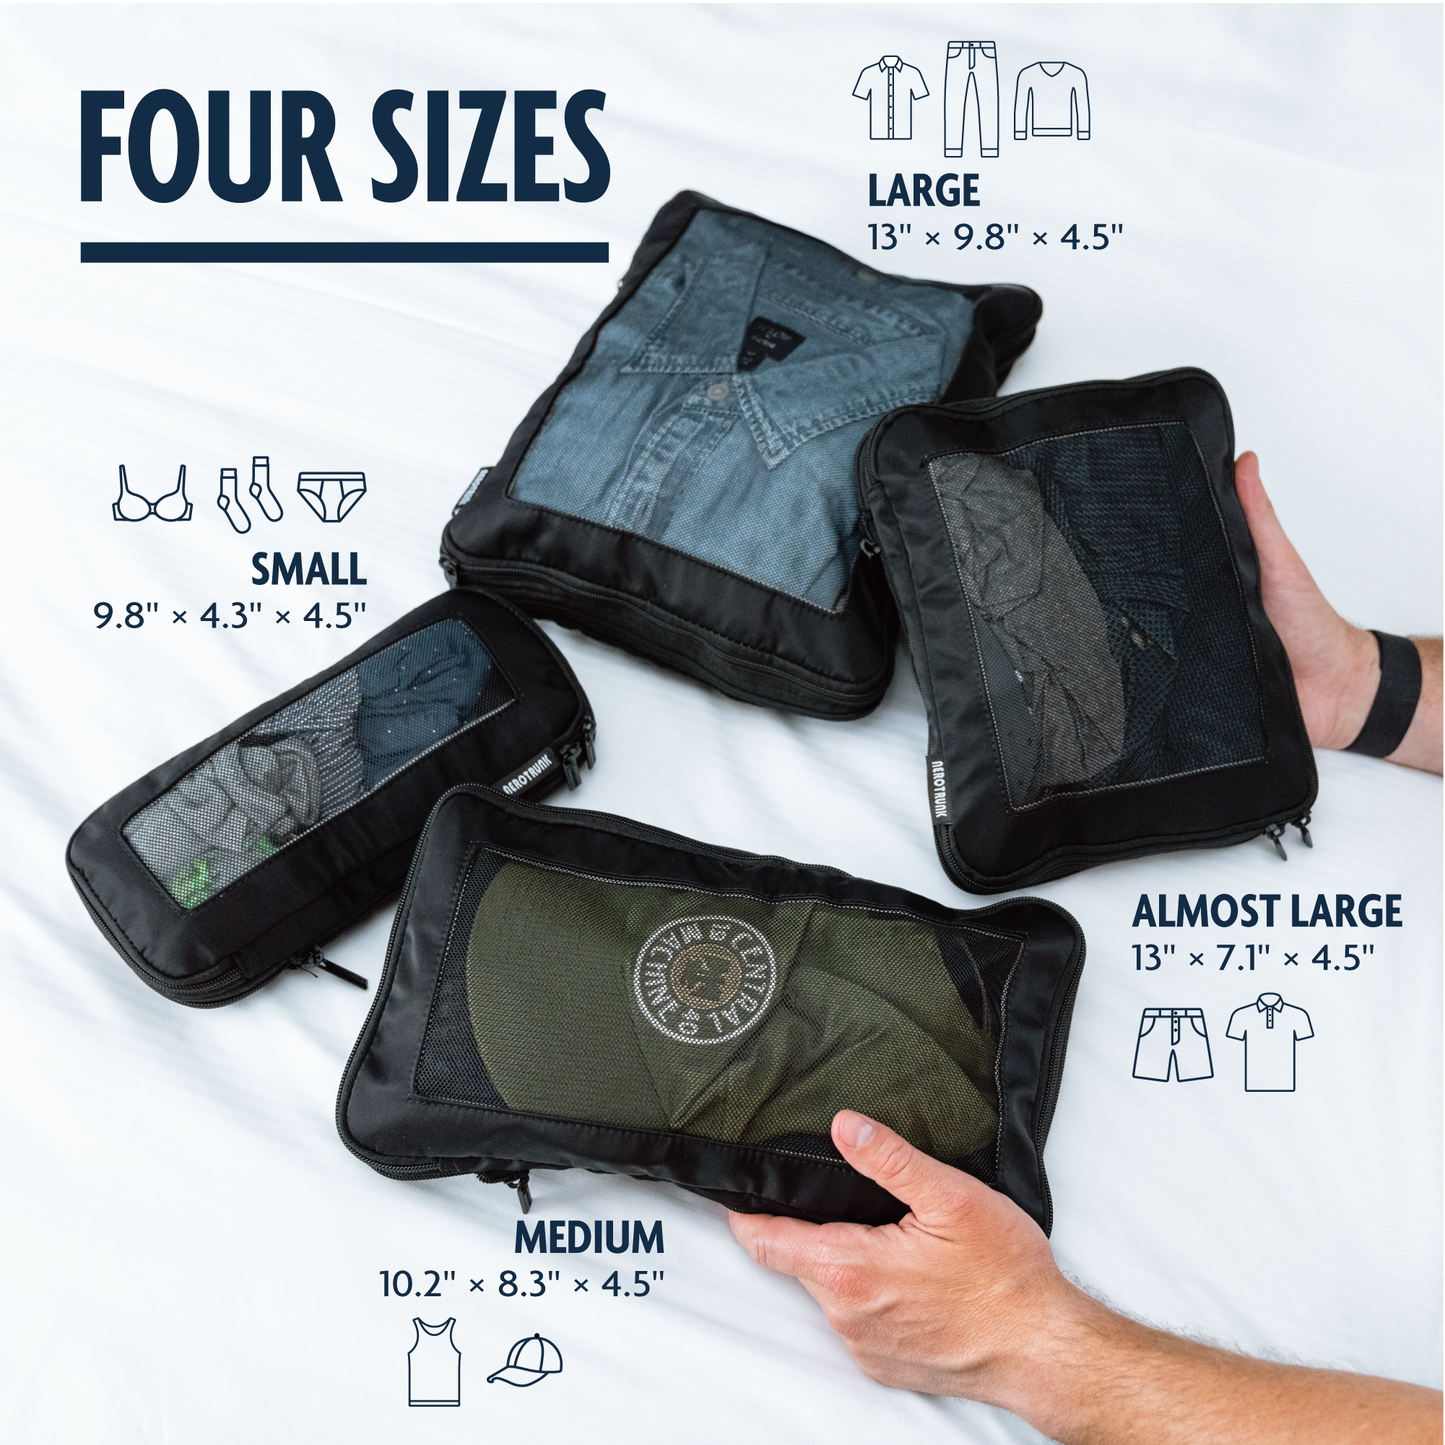 Aerotrunk Collapsible Compression Packing Cubes (4-pack)